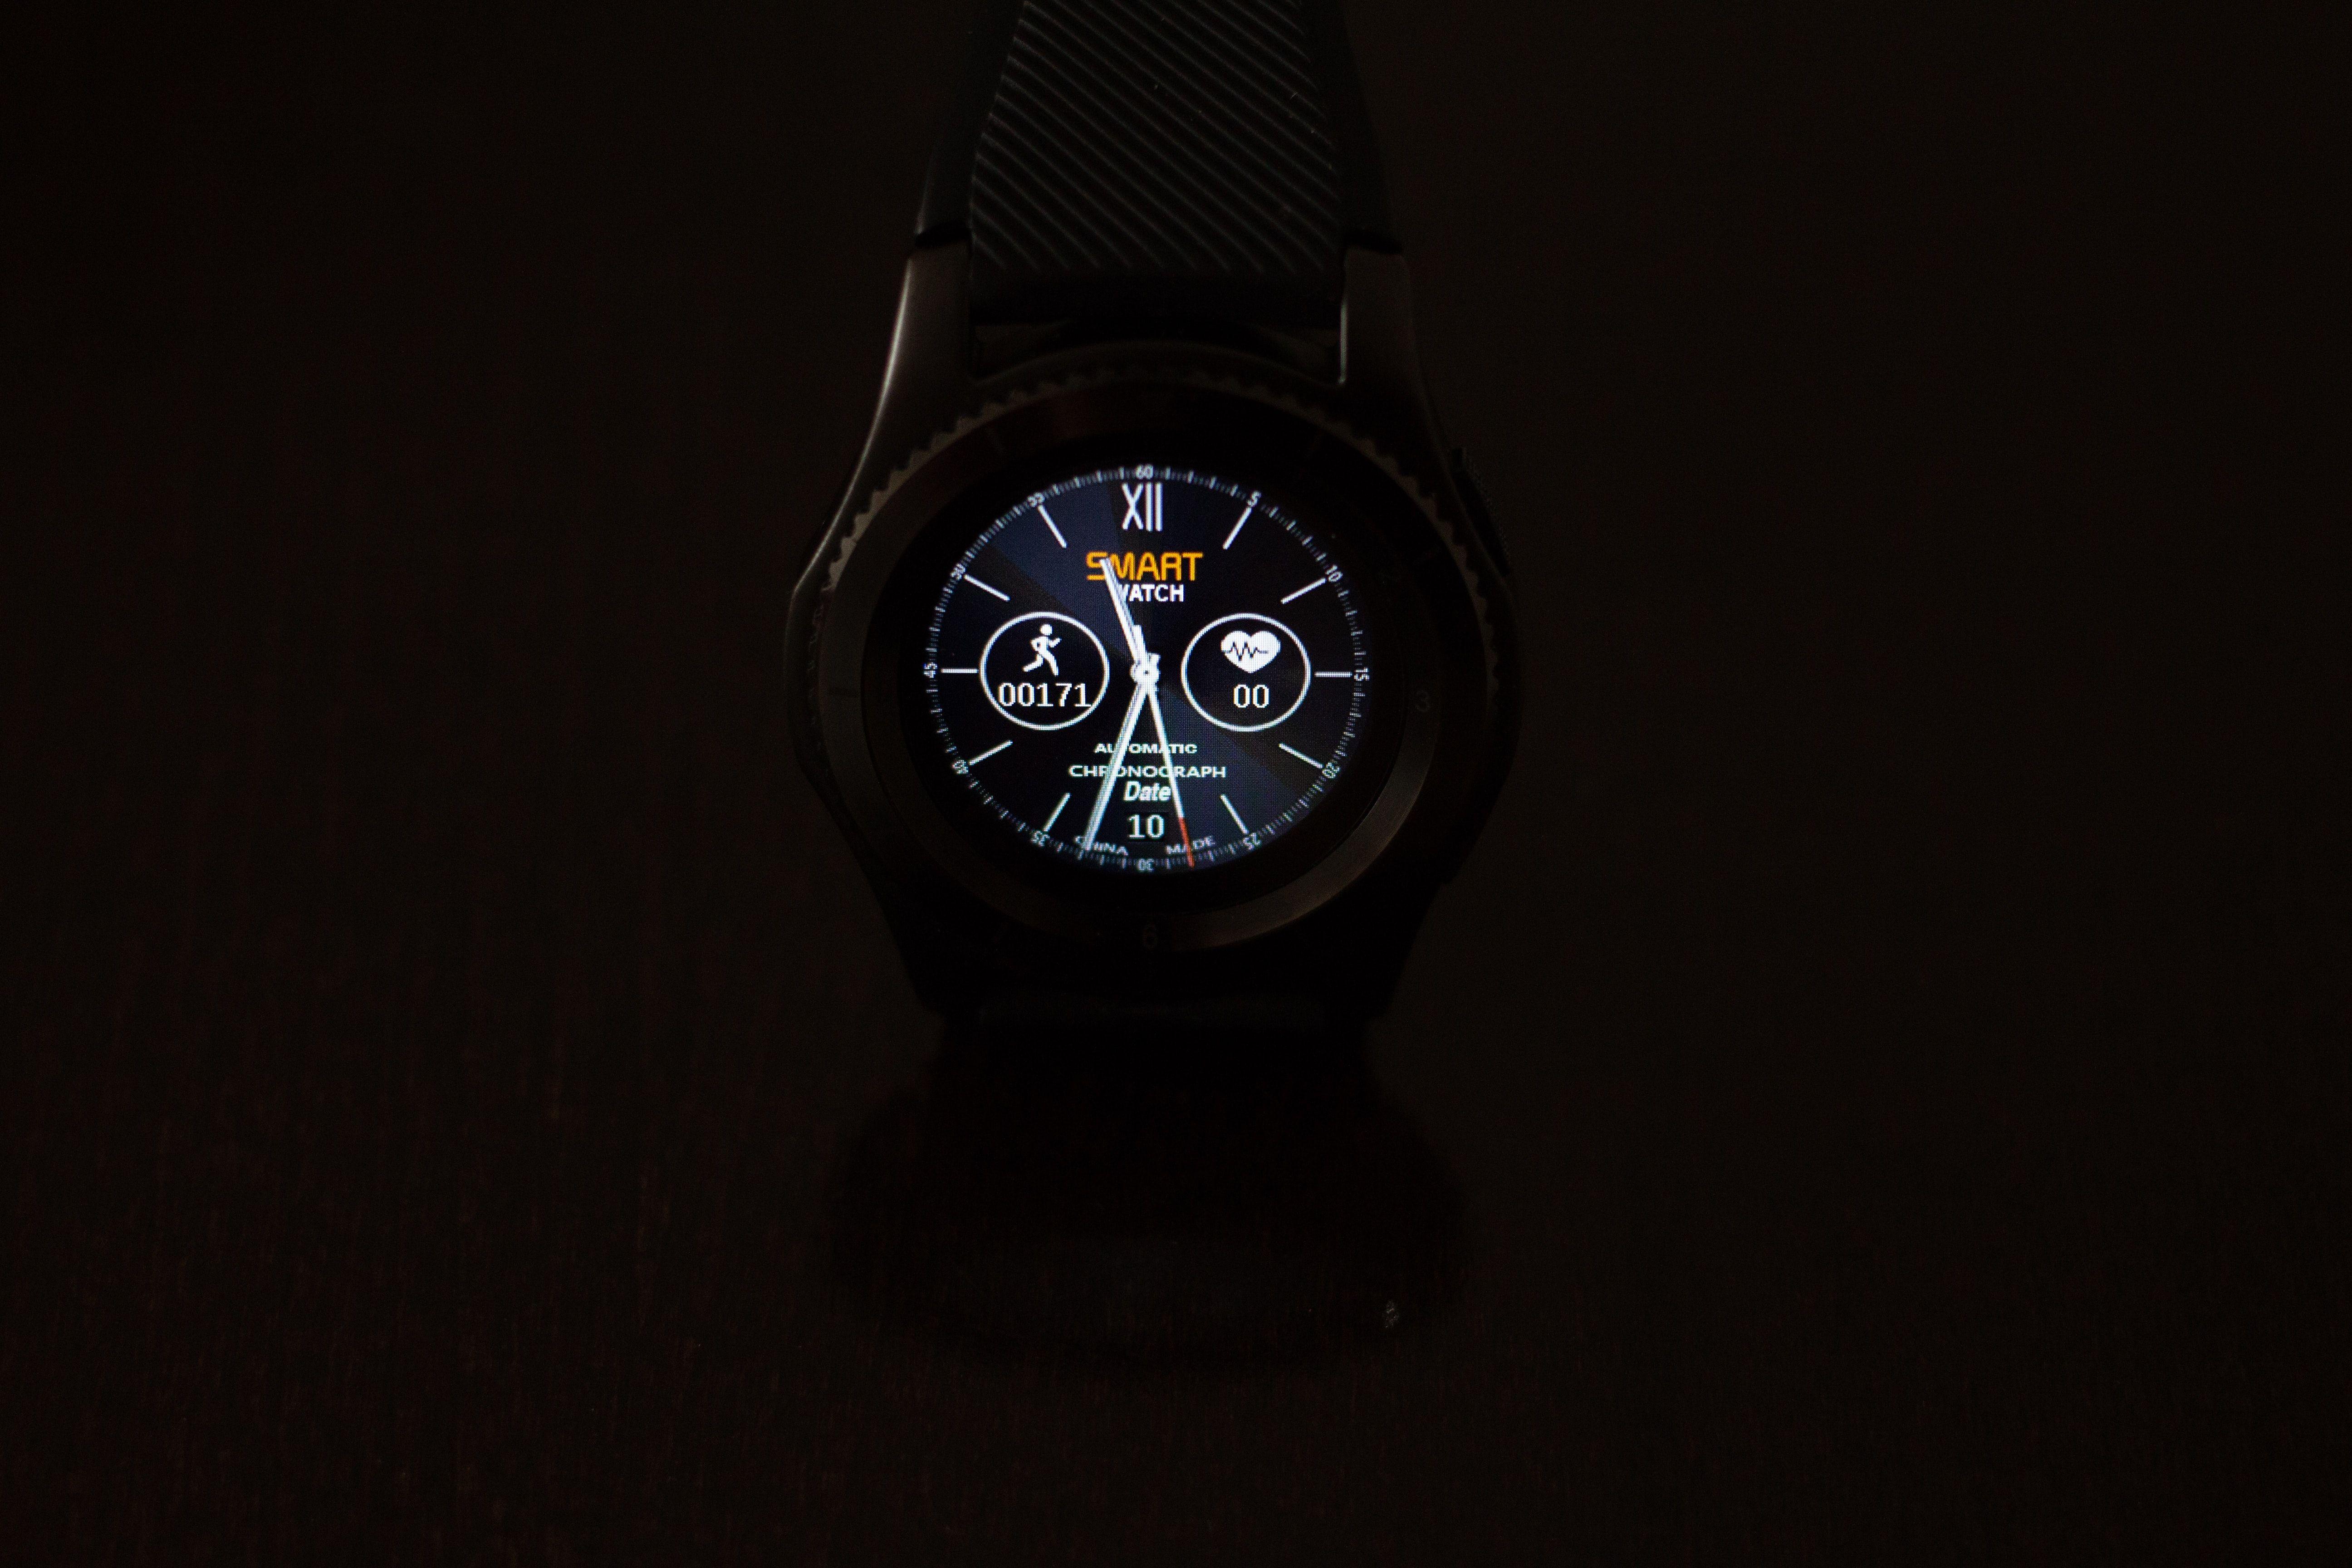 550 Watch Wallpaper Pictures  Download Free Images on Unsplash